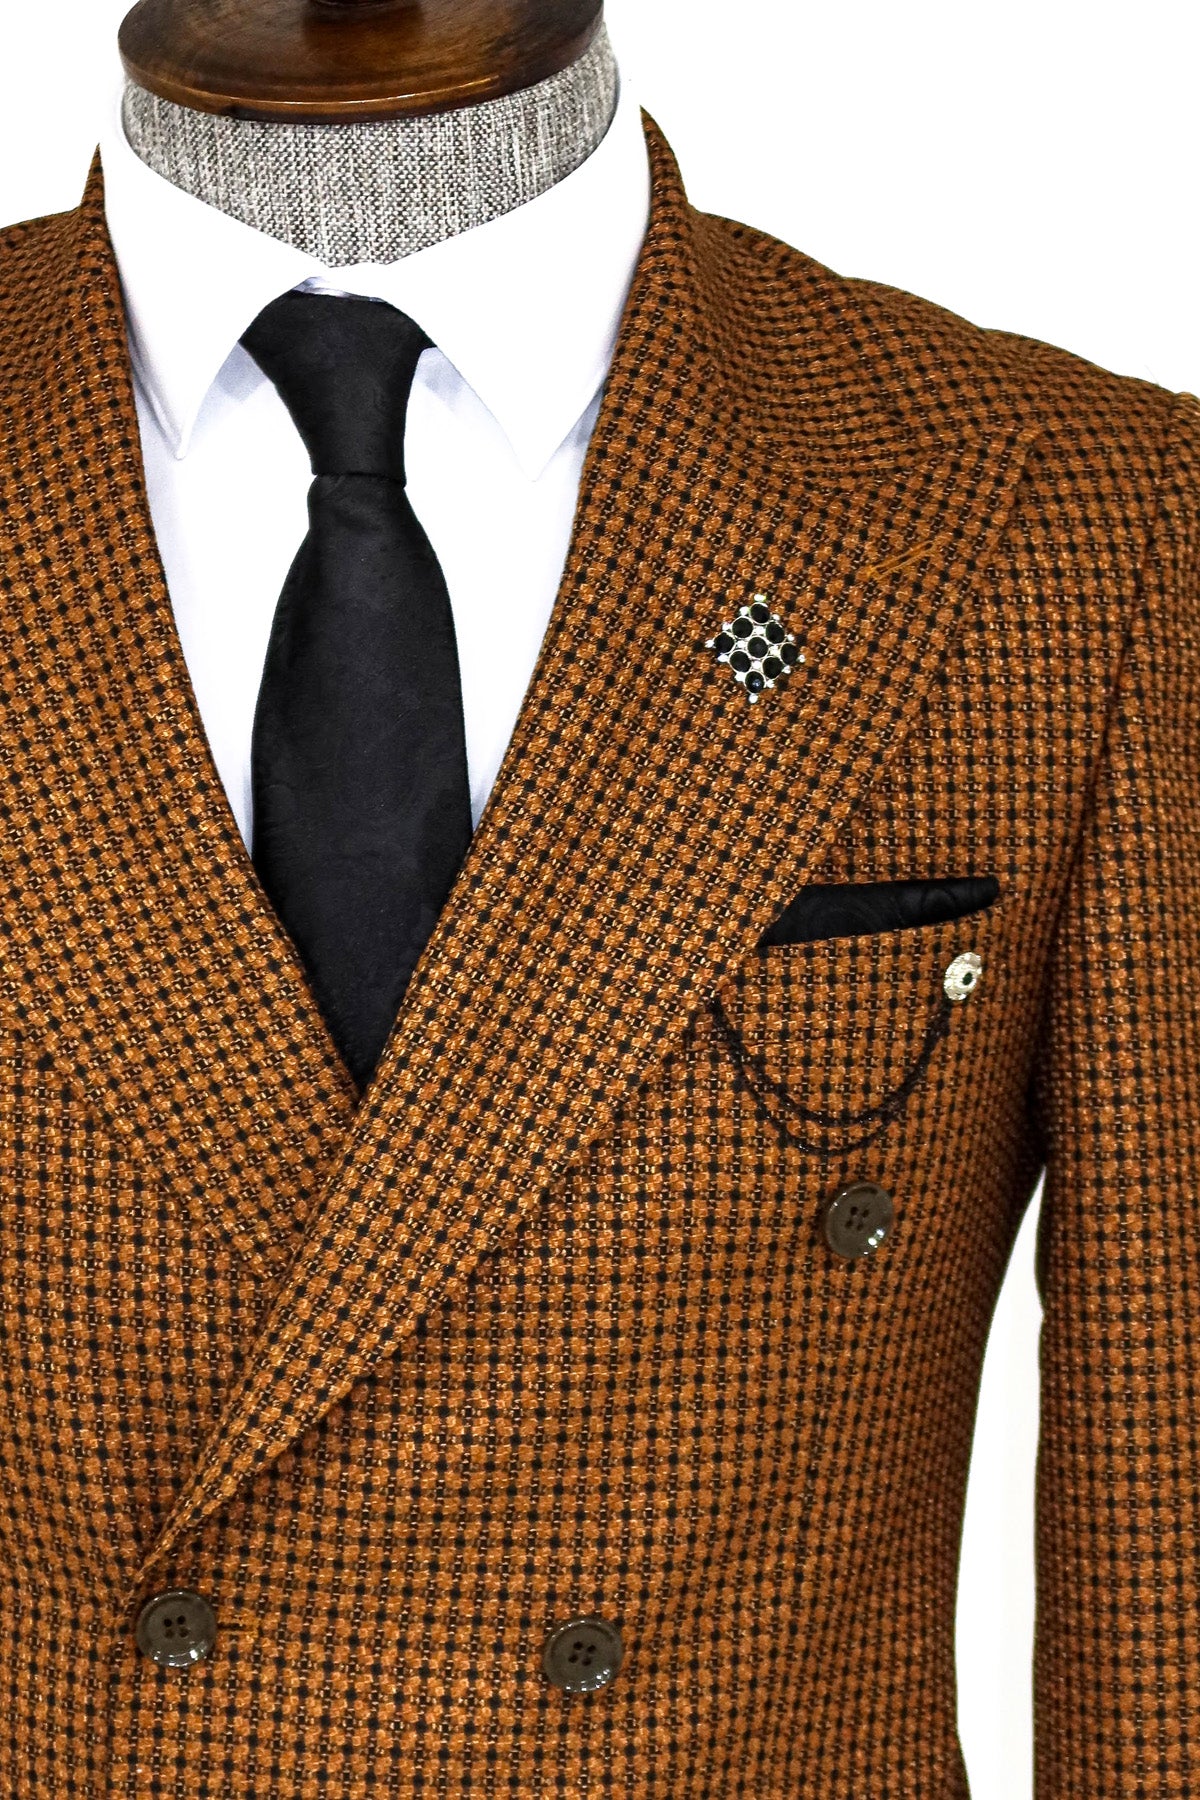 Tawny Houndstooth Patterned Double Breasted Blazer